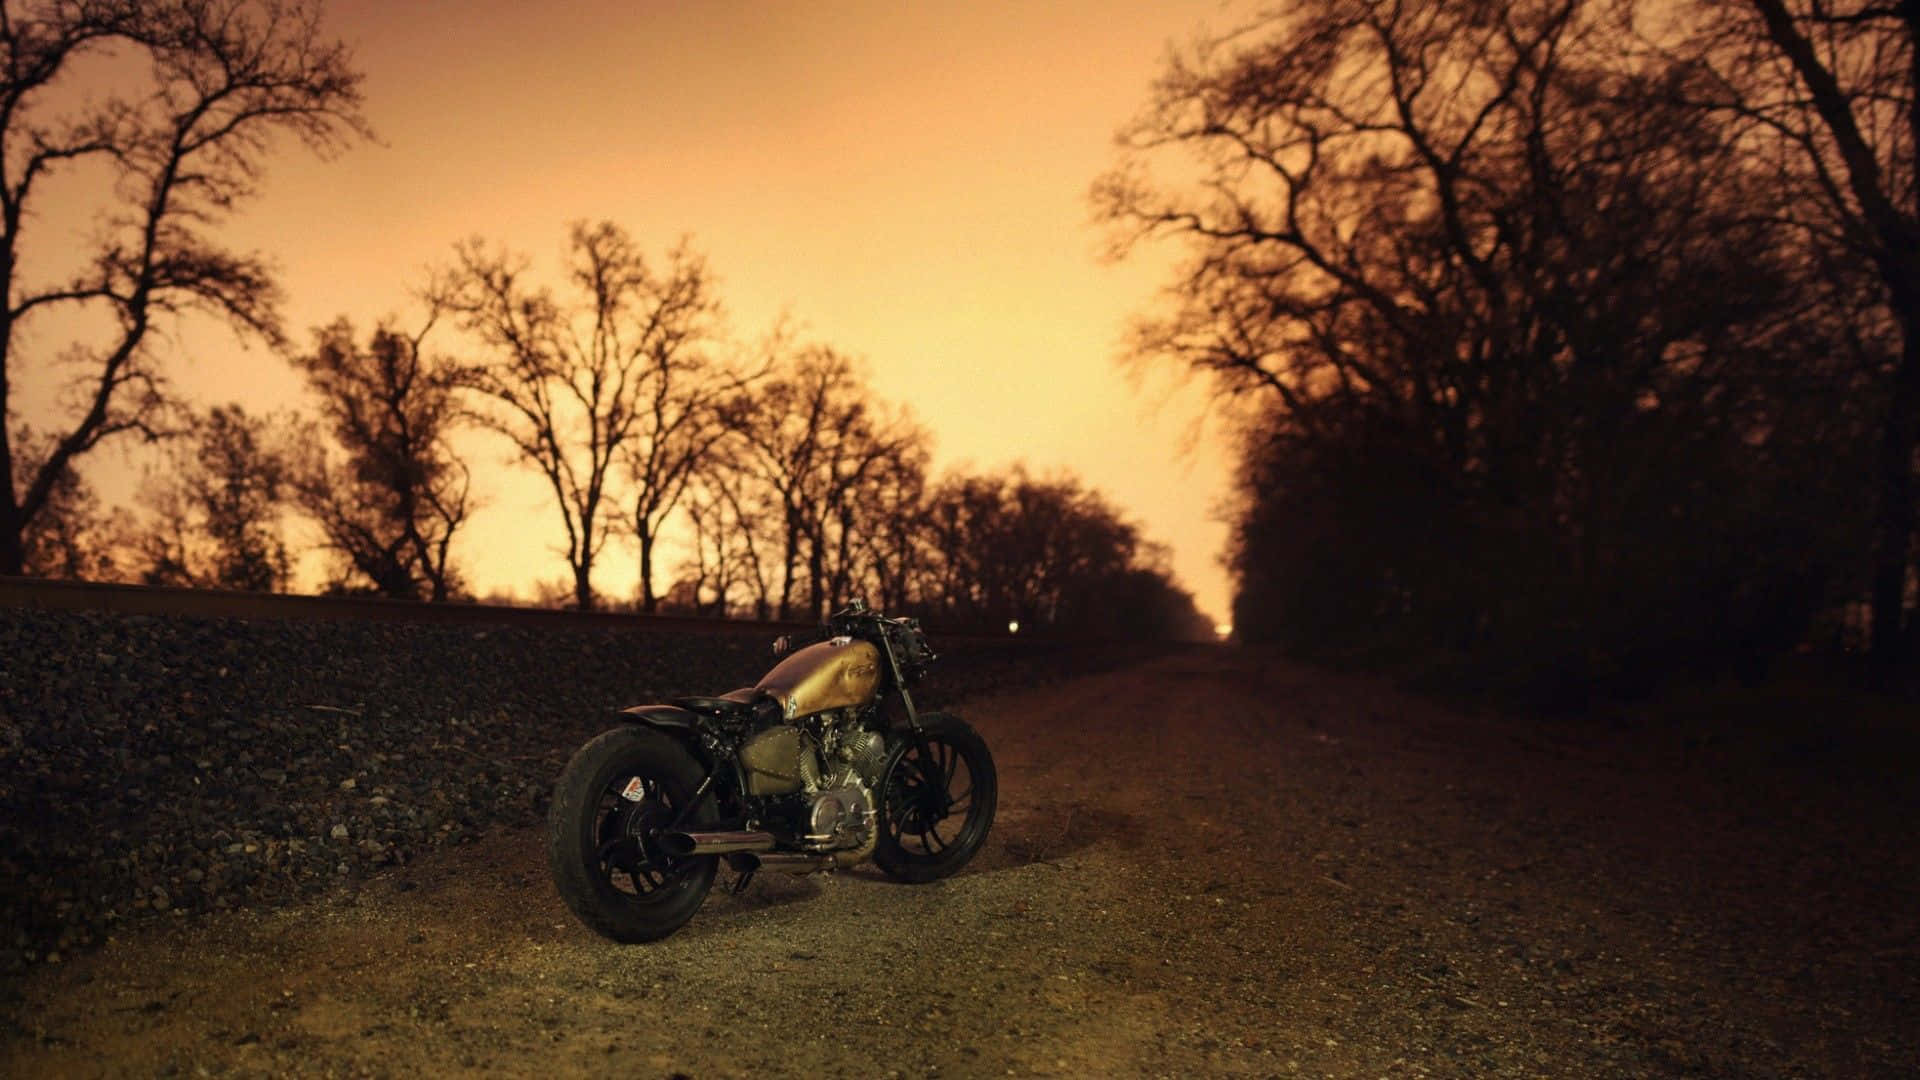 A Motorcycle Parked On A Dirt Road At Sunset